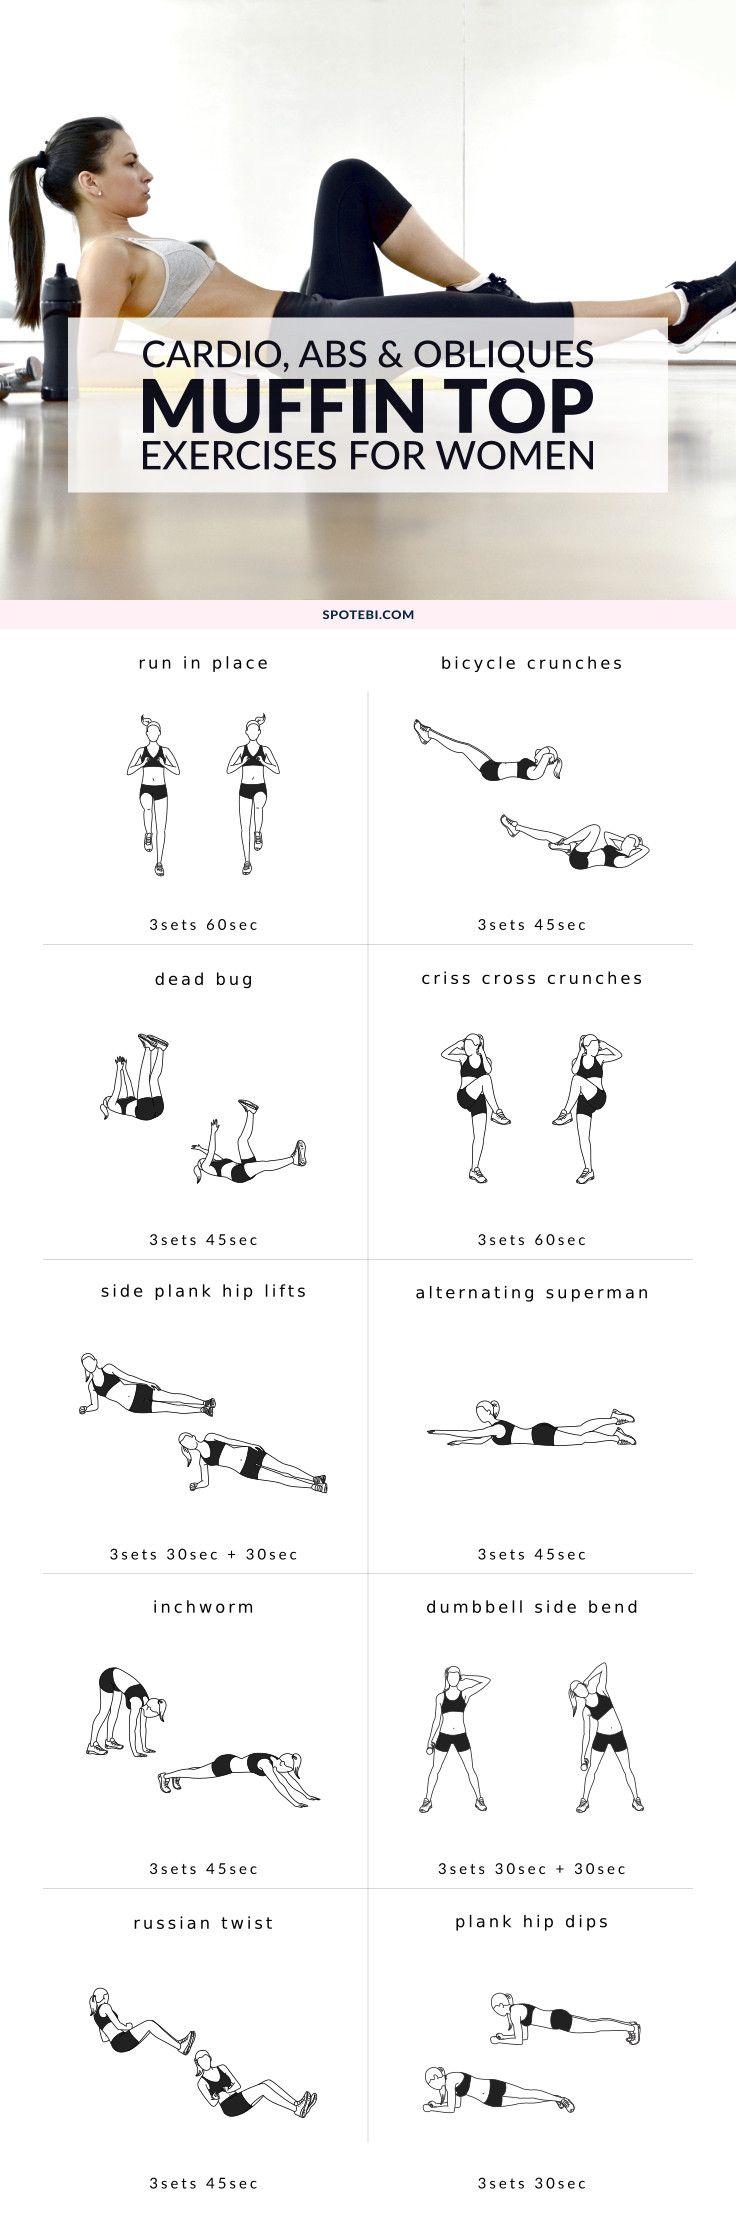 Wedding - Muffin Top Exercises